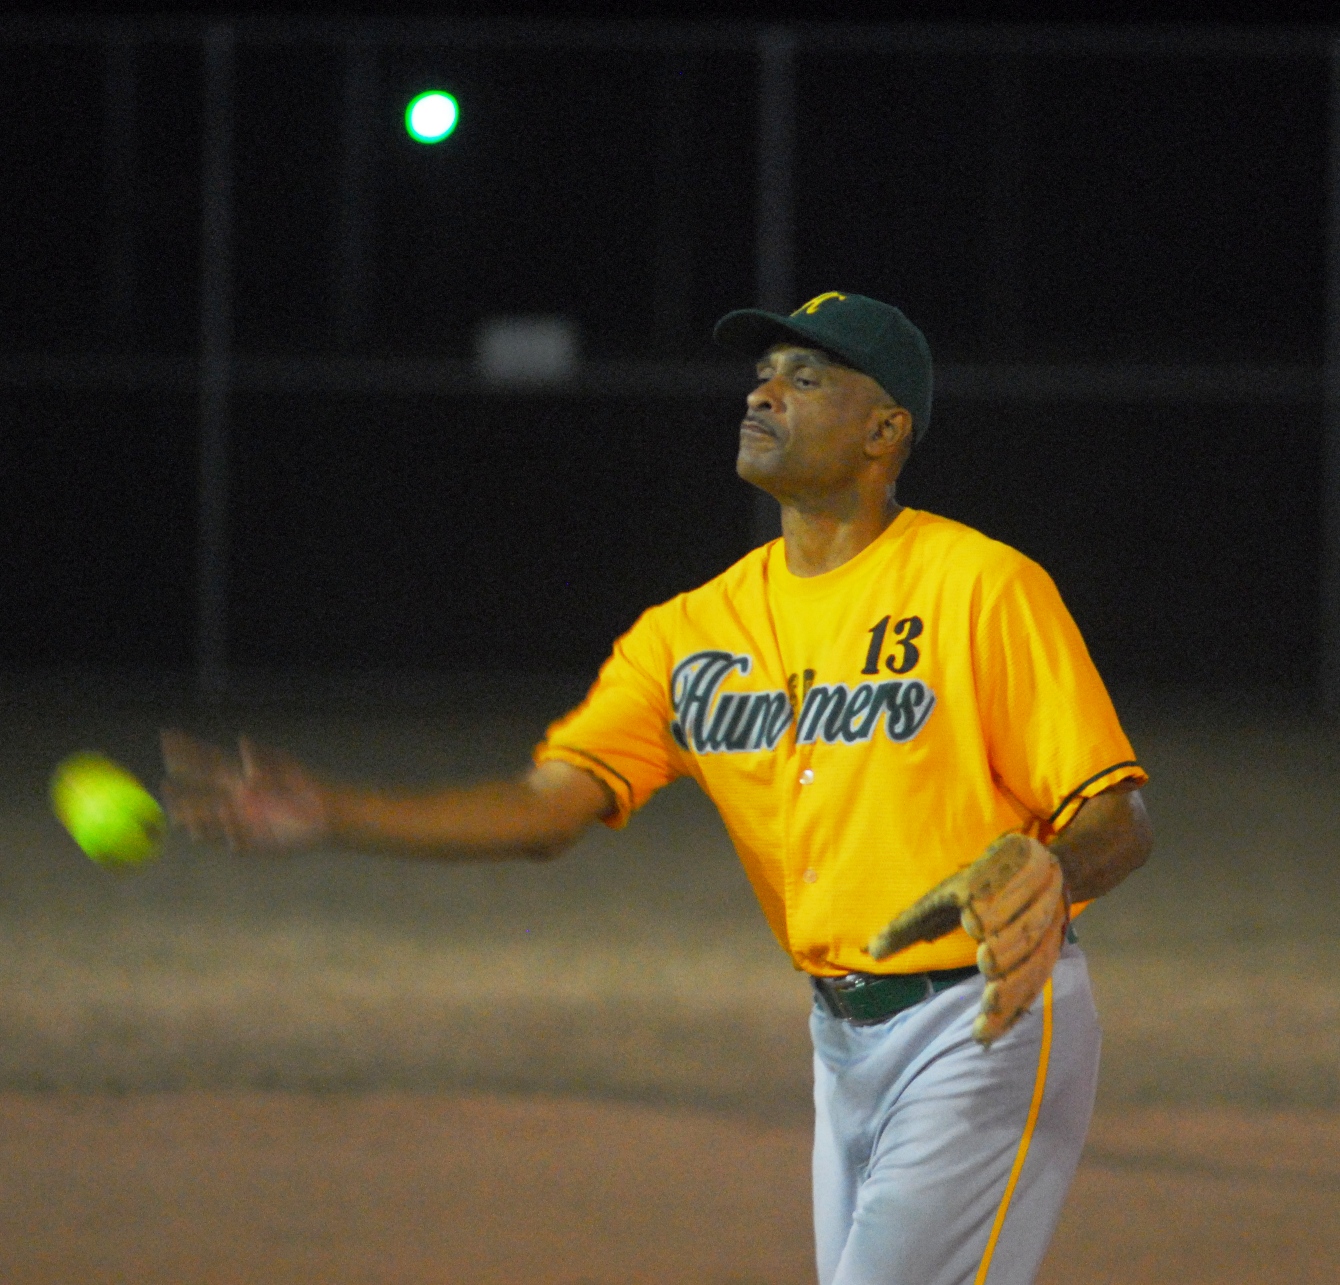 Hummers pitcher Jerry Vialet shut down the Stealers' big bats on Tuesday.